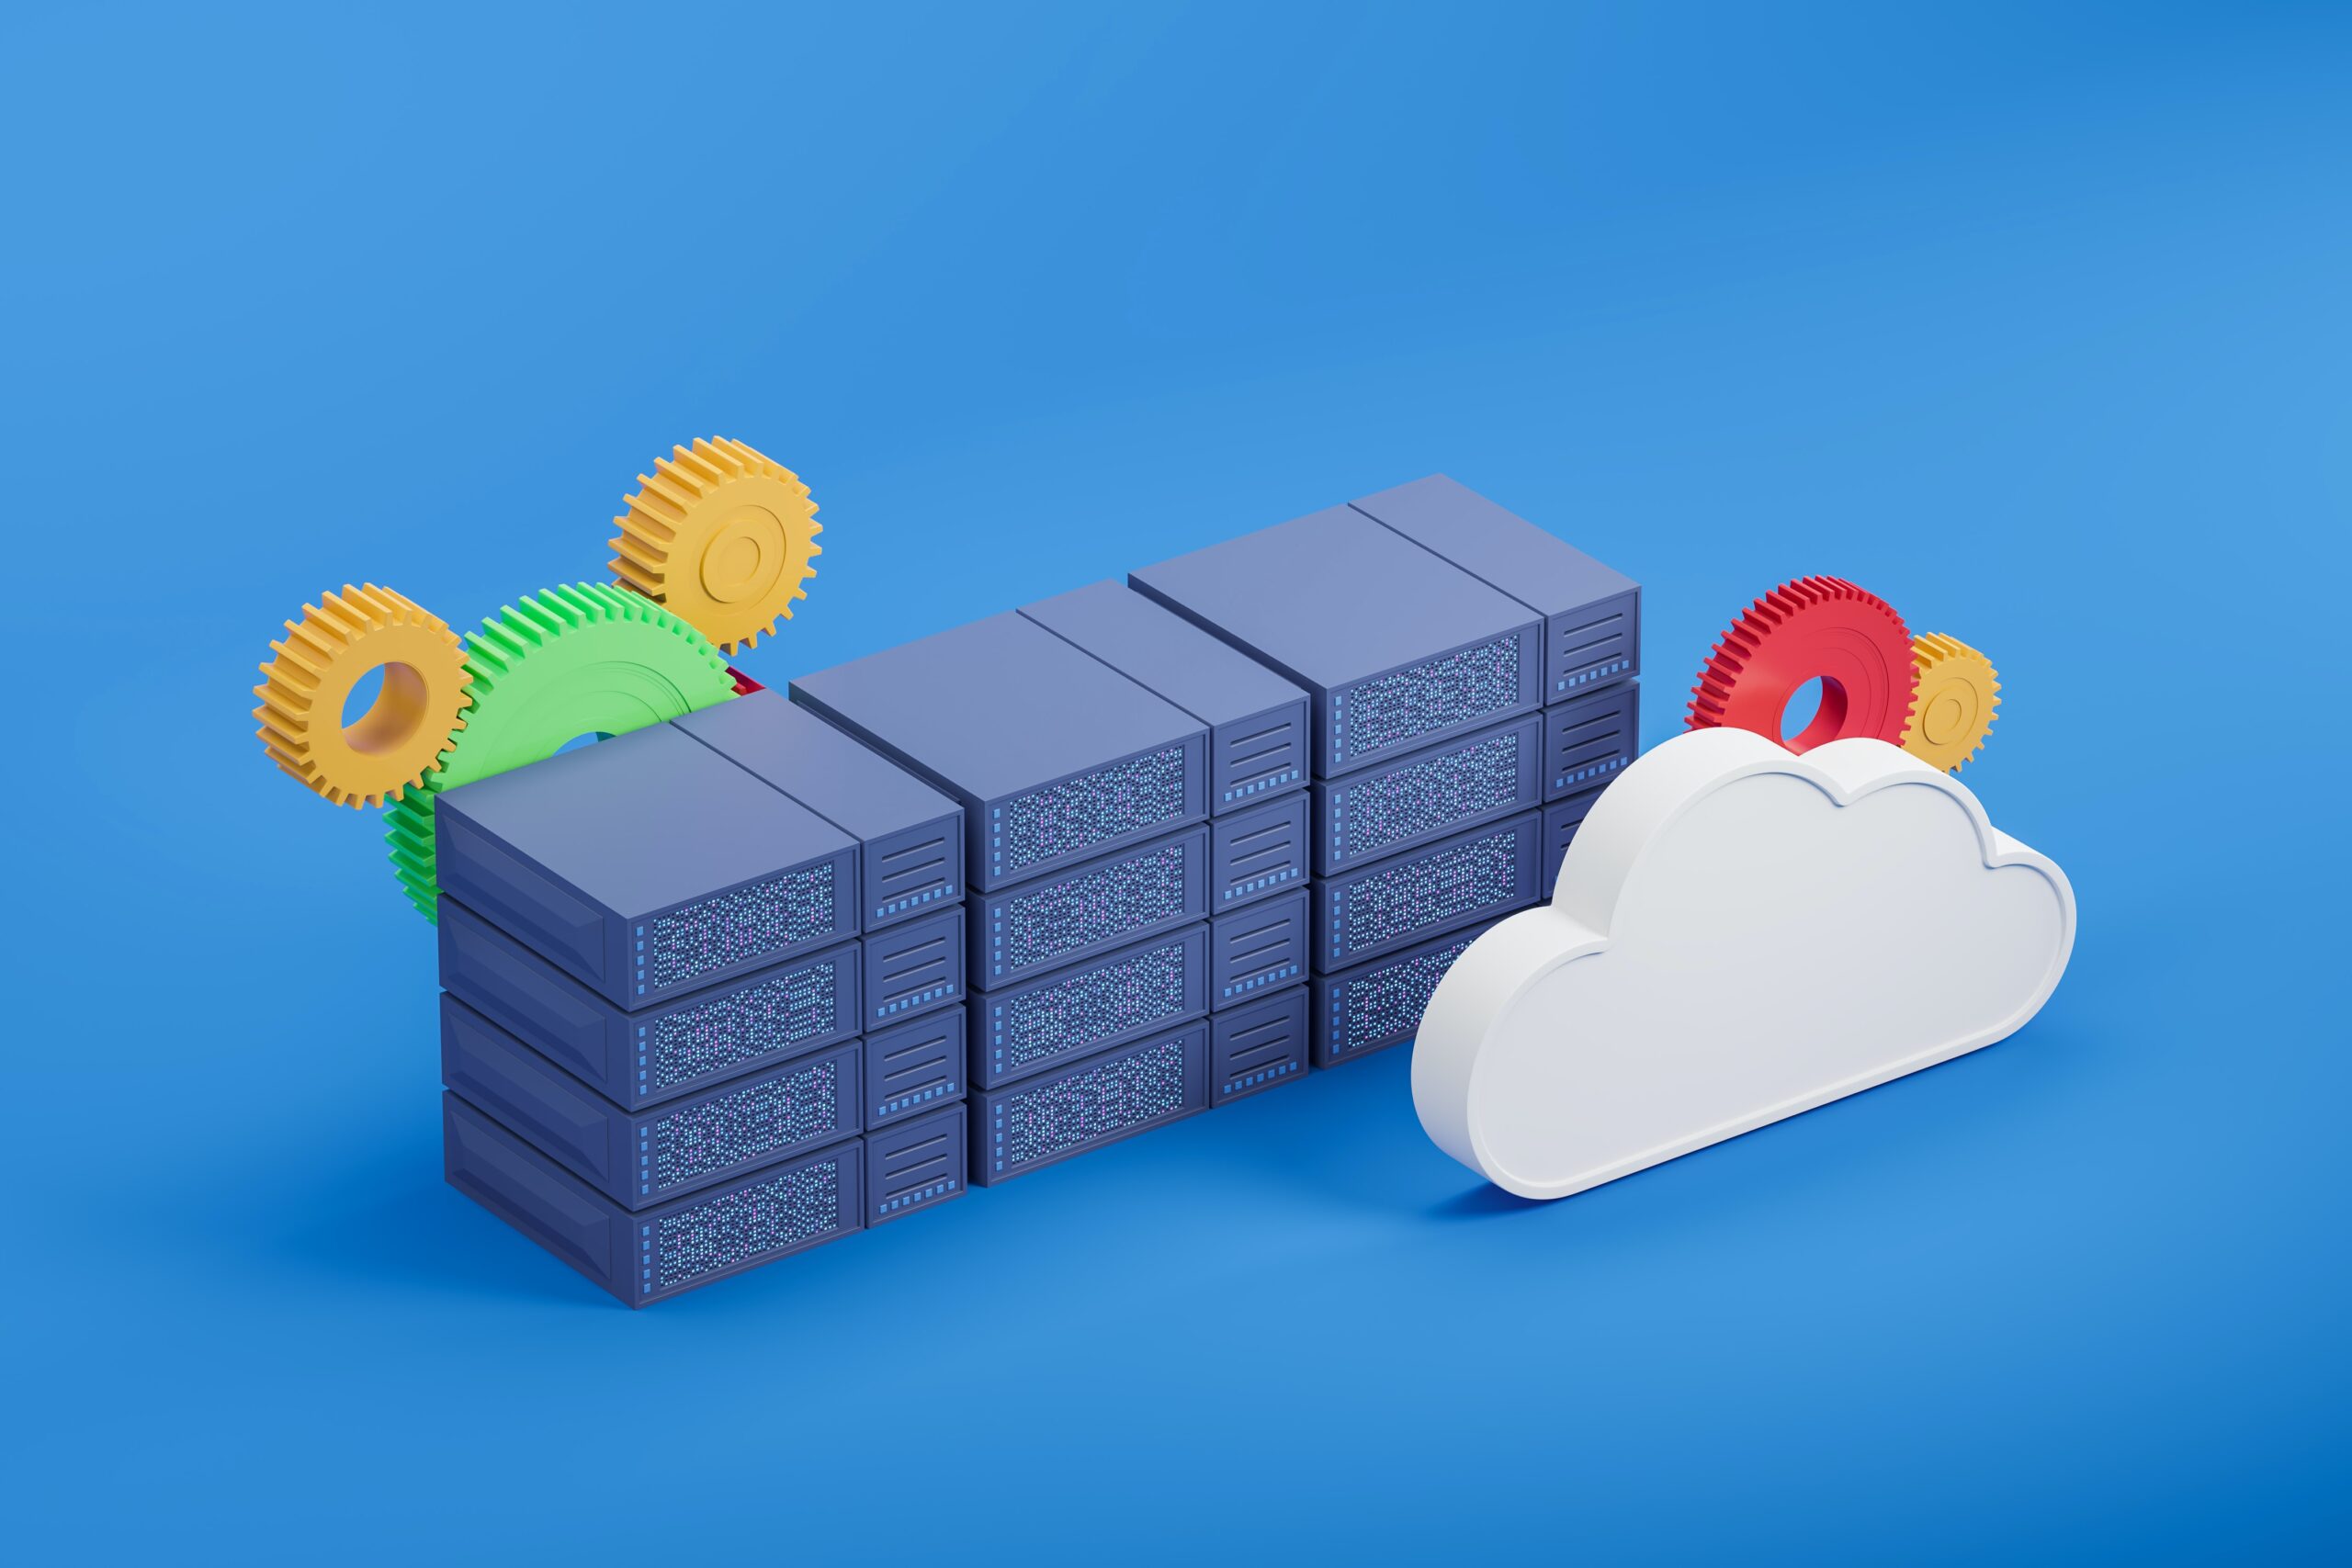 Icon of cloud next to physical large-scale servers symbolizing the benefits of using cloud computing in networking